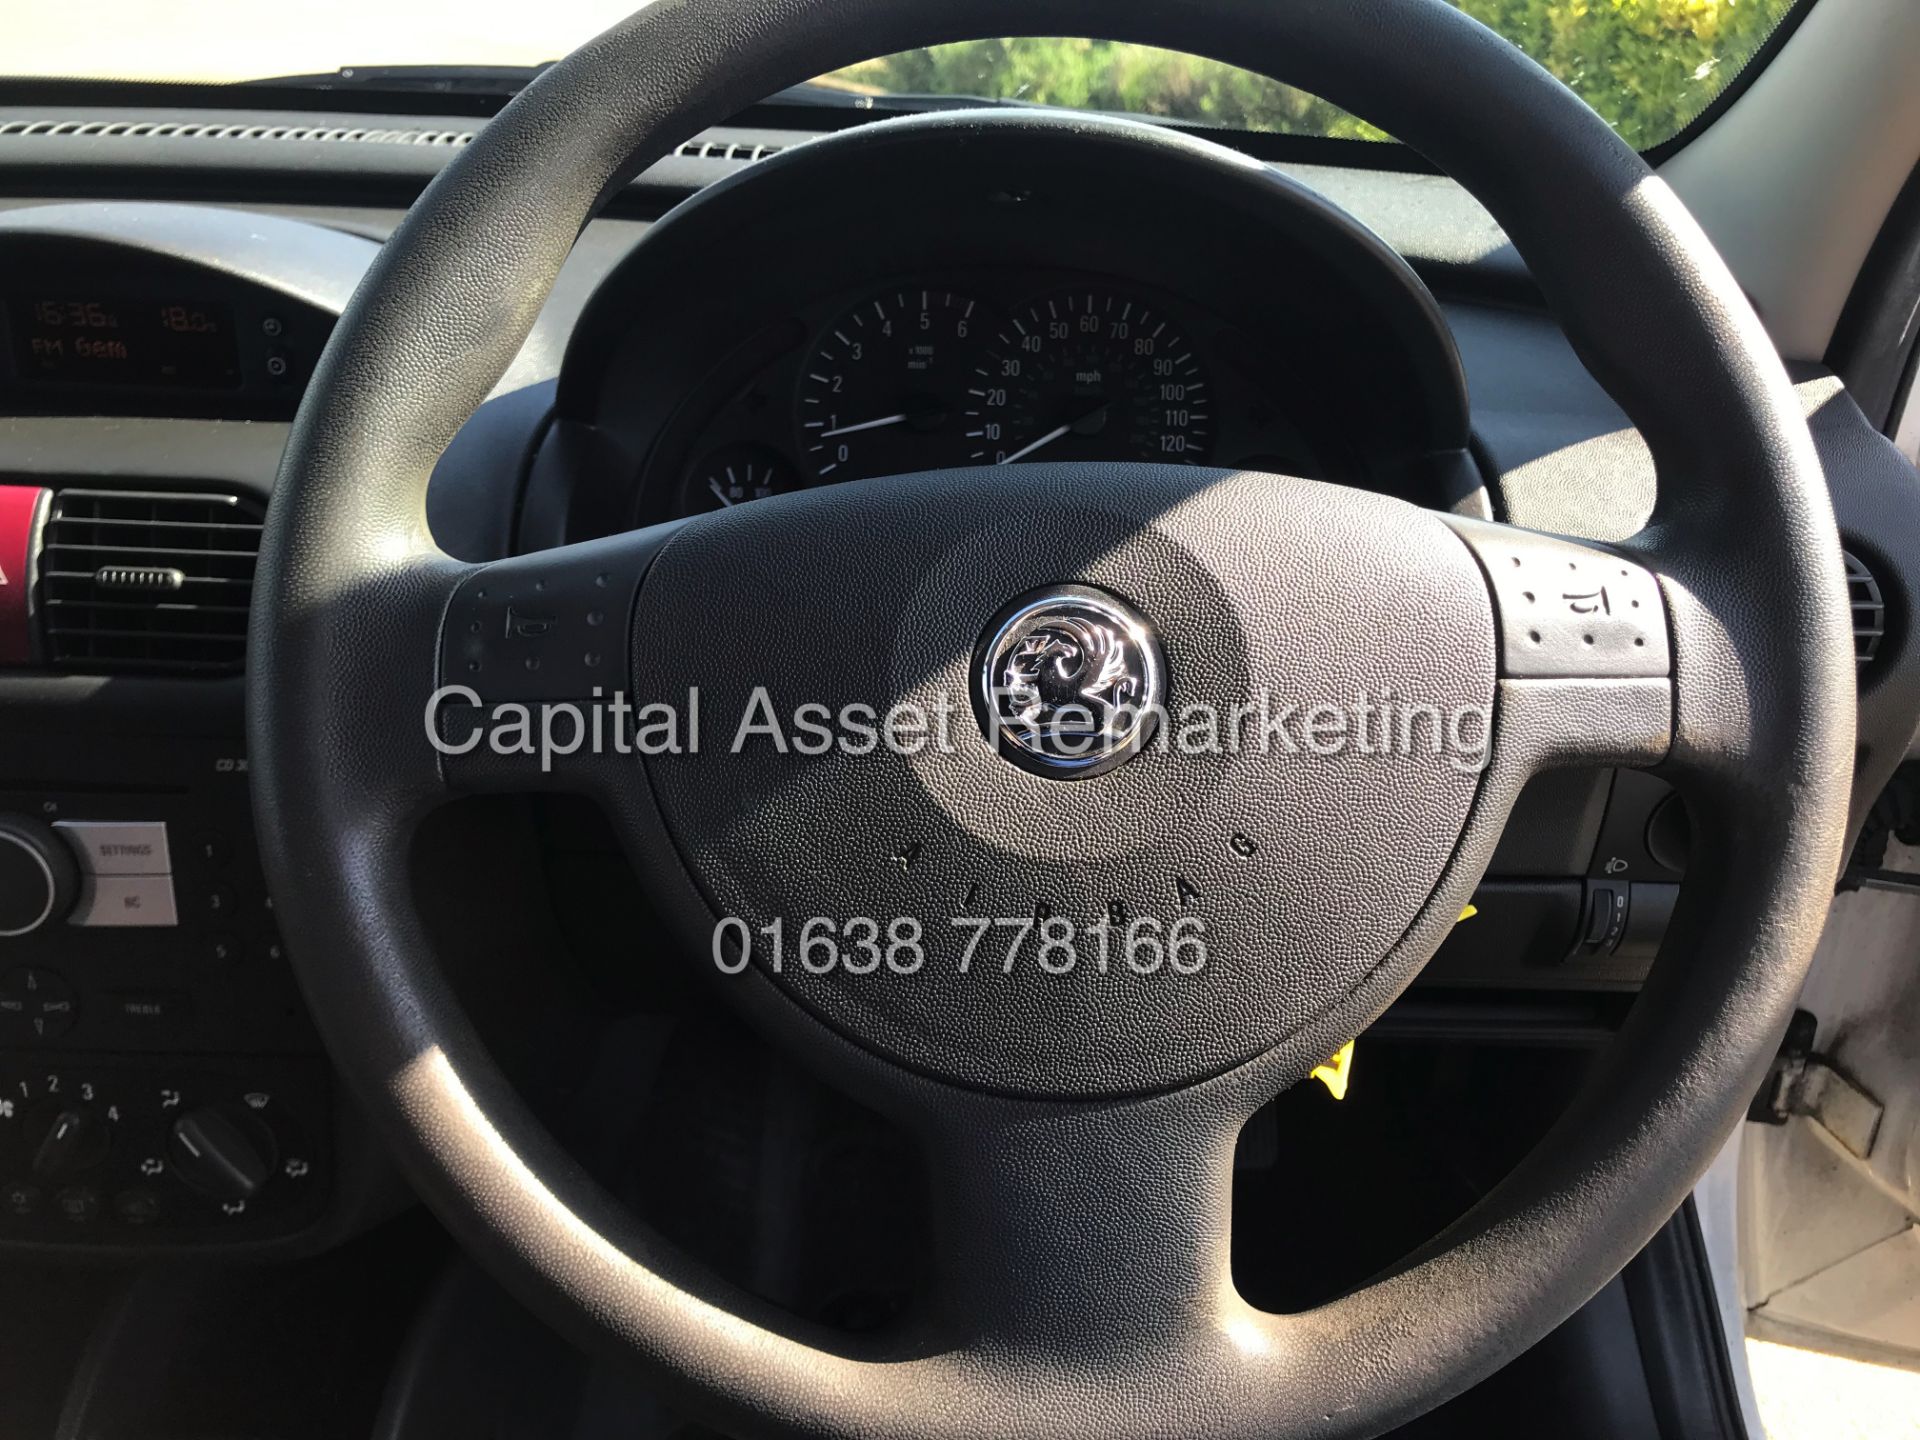 ON SALE VAUXHALL COMBO 2000 CDTI (09 REG) 1 OWNER FSH *AIR CON* SIDE LOADING DOOR - Image 11 of 19